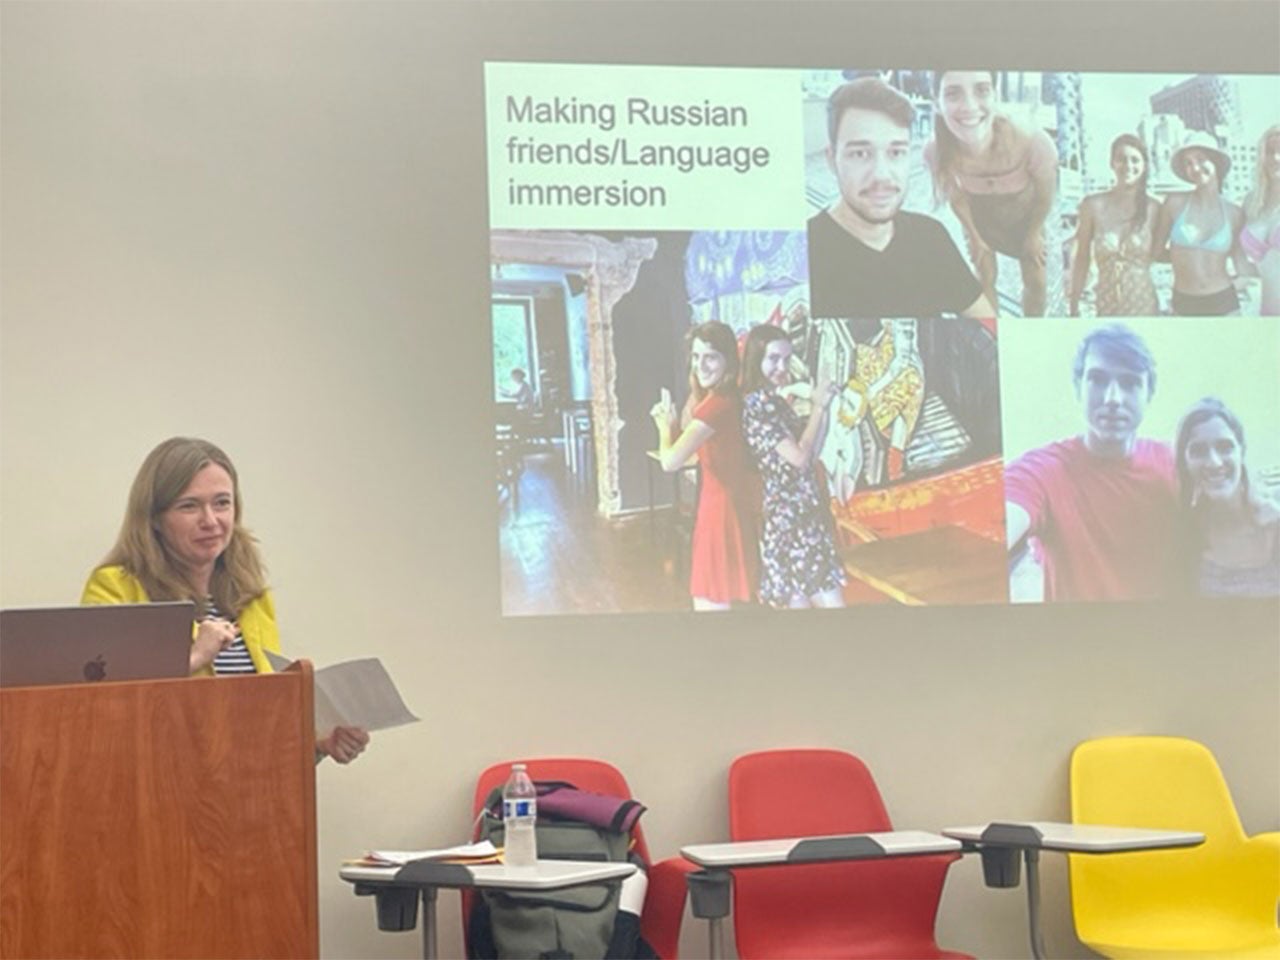 Professor Jenny Kaminer stands at a lectern in front of a projector screen. The screen displays a presentation with the title "Making Russian friends/Language immersion."